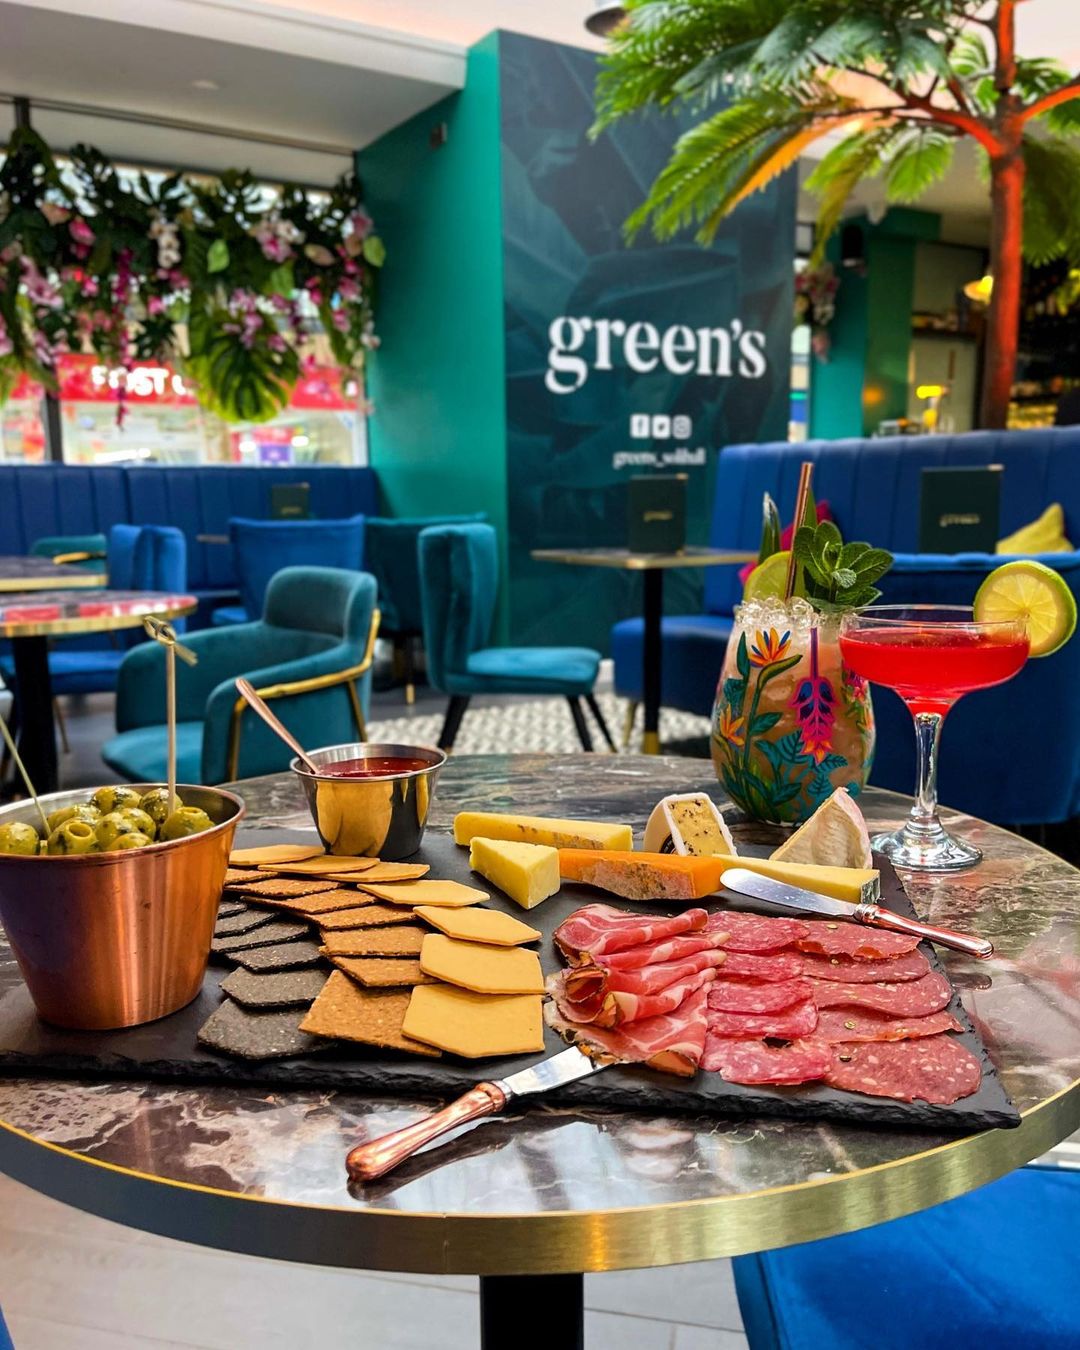 Green’s Solihull – 2 for 1 on Selected Cocktails, Beer & Wine